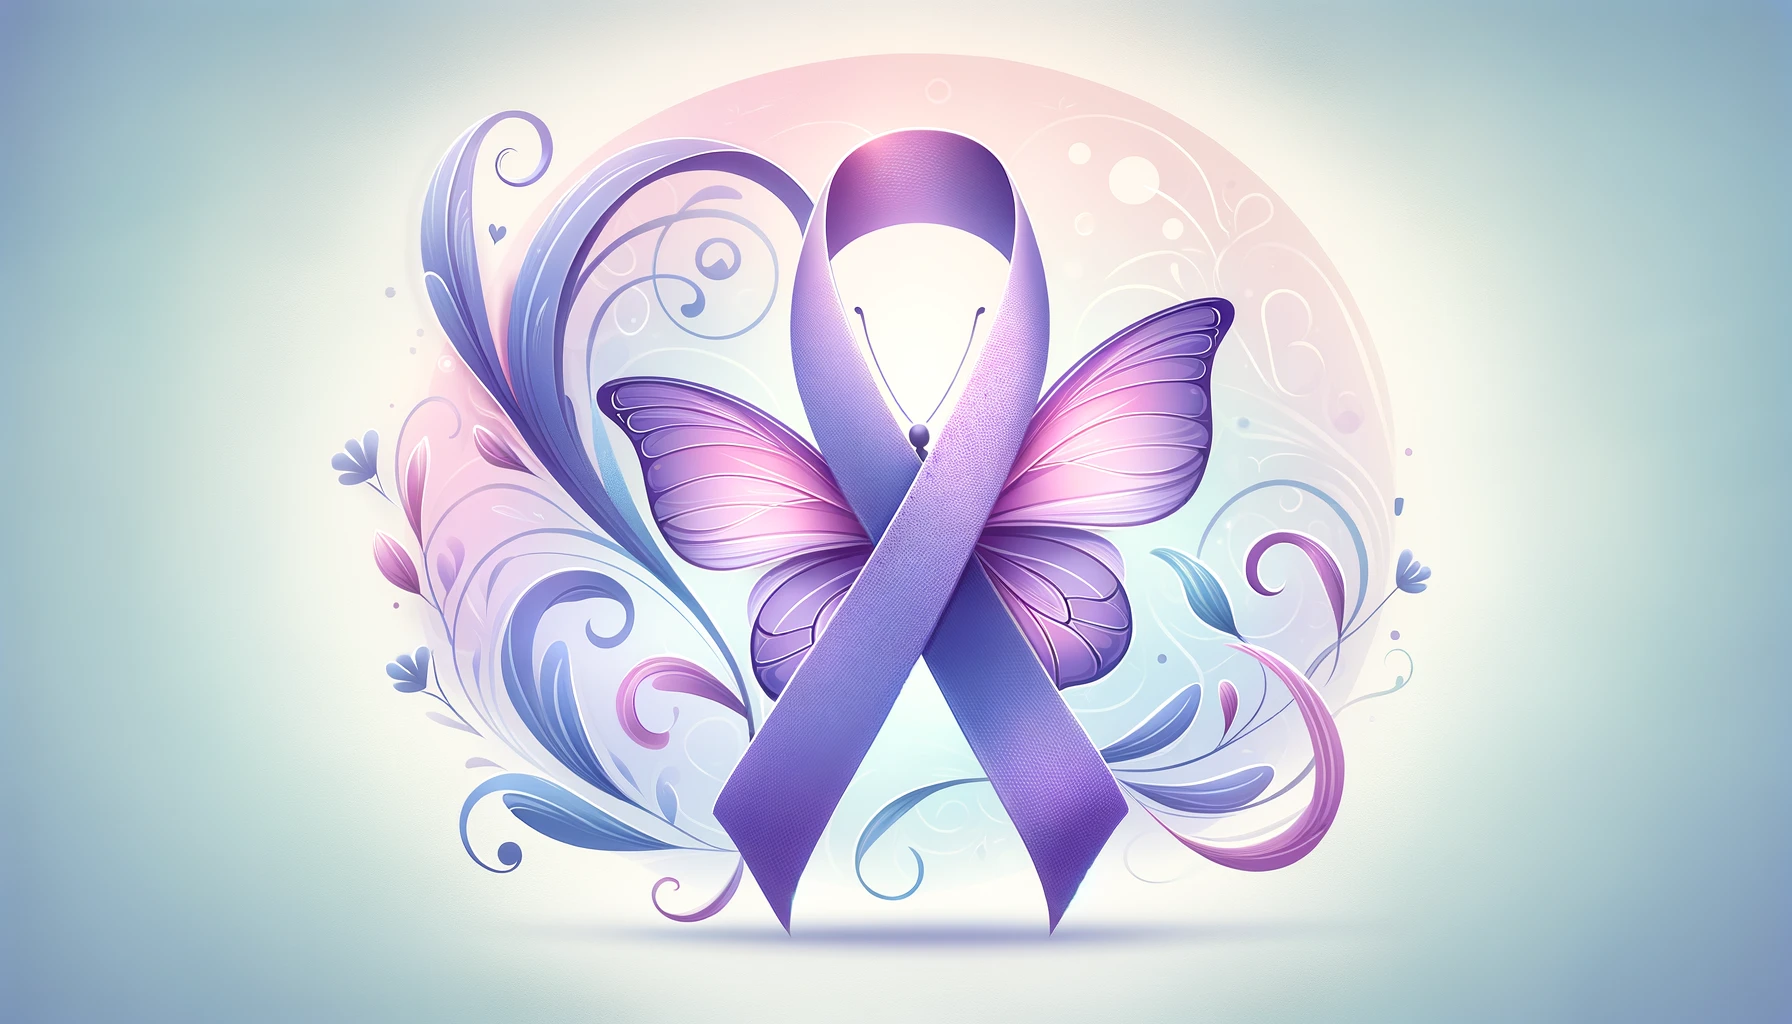 Featured image for “What is the ribbon color for lupus?”